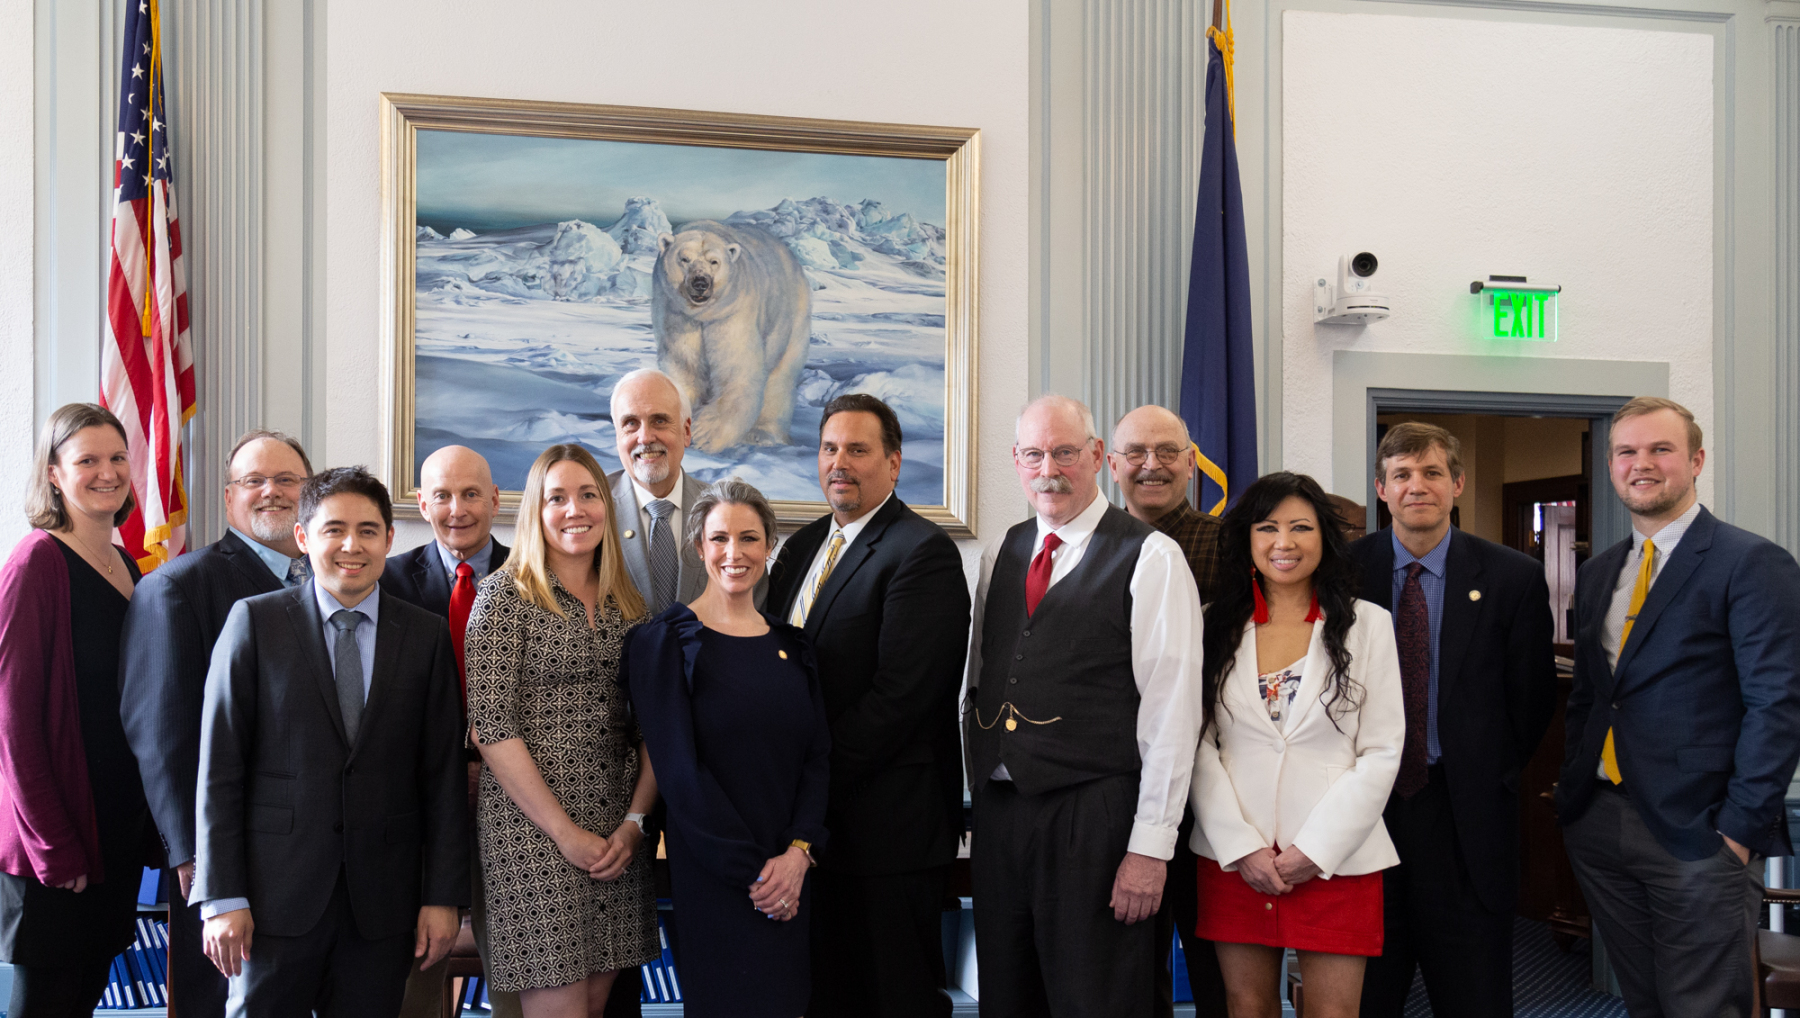 Members of the conference committee and their staff after reaching a tentative agreement on Tuesday, May 17, 2022.  (From Left, Front Row) Joseph Byrnes (Chief of Staff for Rep. LeBon), Liz Harpold (Staff for Rep. Ortiz), House Finance Co-Chair Representative Kelly Merrick (R-Eagle River), Senate Finance Co-Chair Senator Bert Stedman (R-Sitka), Sonja Kawasaki (Chief of Staff for Sen. Wielechowski). (From Left, Back Row) Tally Teal (Chief of Staff for Rep. Merrick), Brodie Anderson (Staff for Rep. Foster), Representative Dan Ortiz (I-Ketchikan), Representative Bart LeBon (R-Fairbanks), Pete Ecklund (Staff for Sen. Stedman), Senate Finance Co-Chair Senator Click Bishop (R-Fairbanks), Senator Bill Wielechowski (D-Anchorage), Cody Grussendorf (Staff for Sen. Bishop).